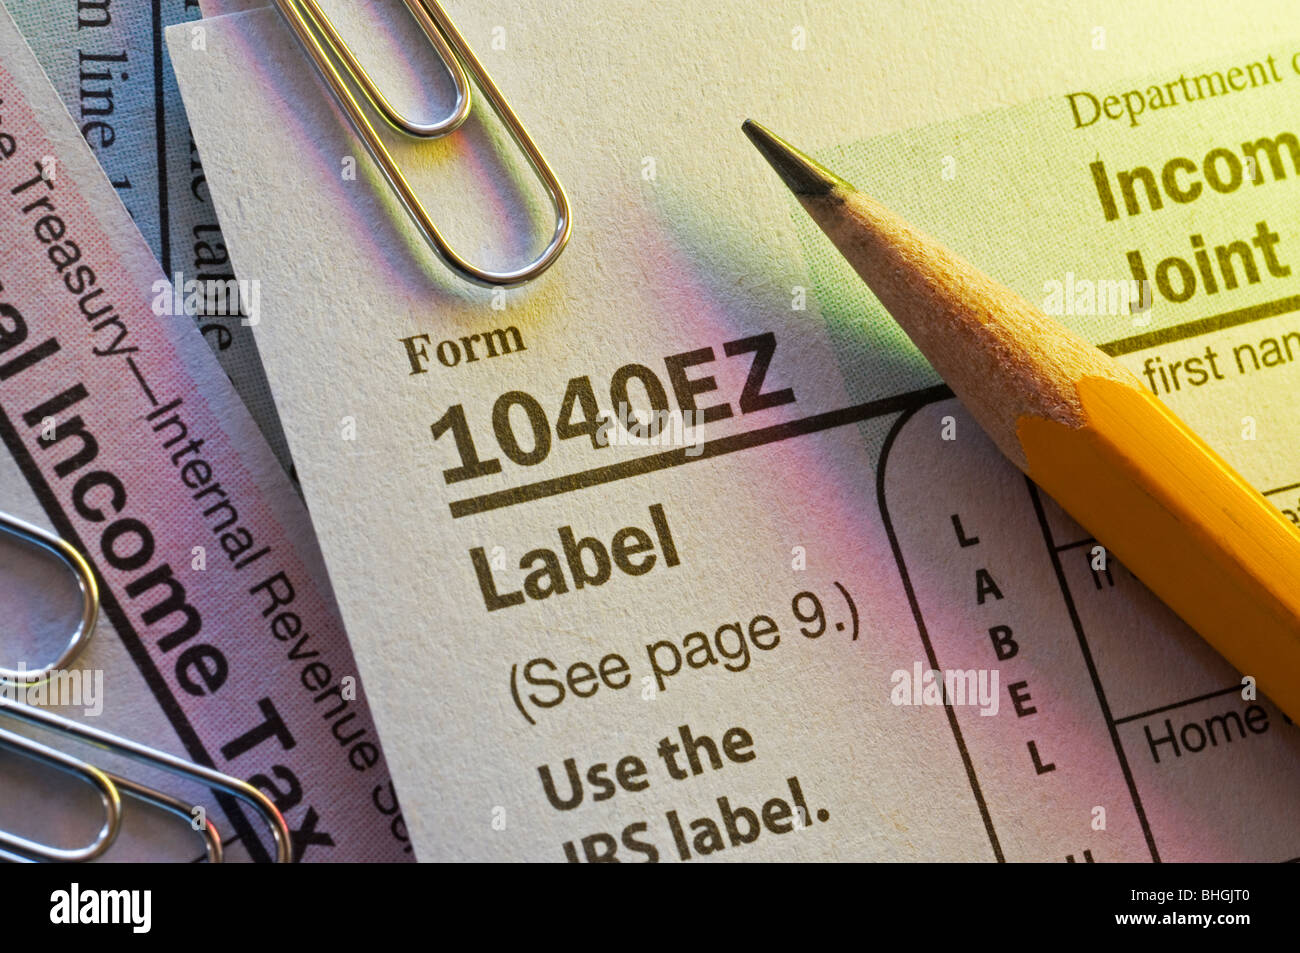 United States Tax Forms with pencil Stock Photo